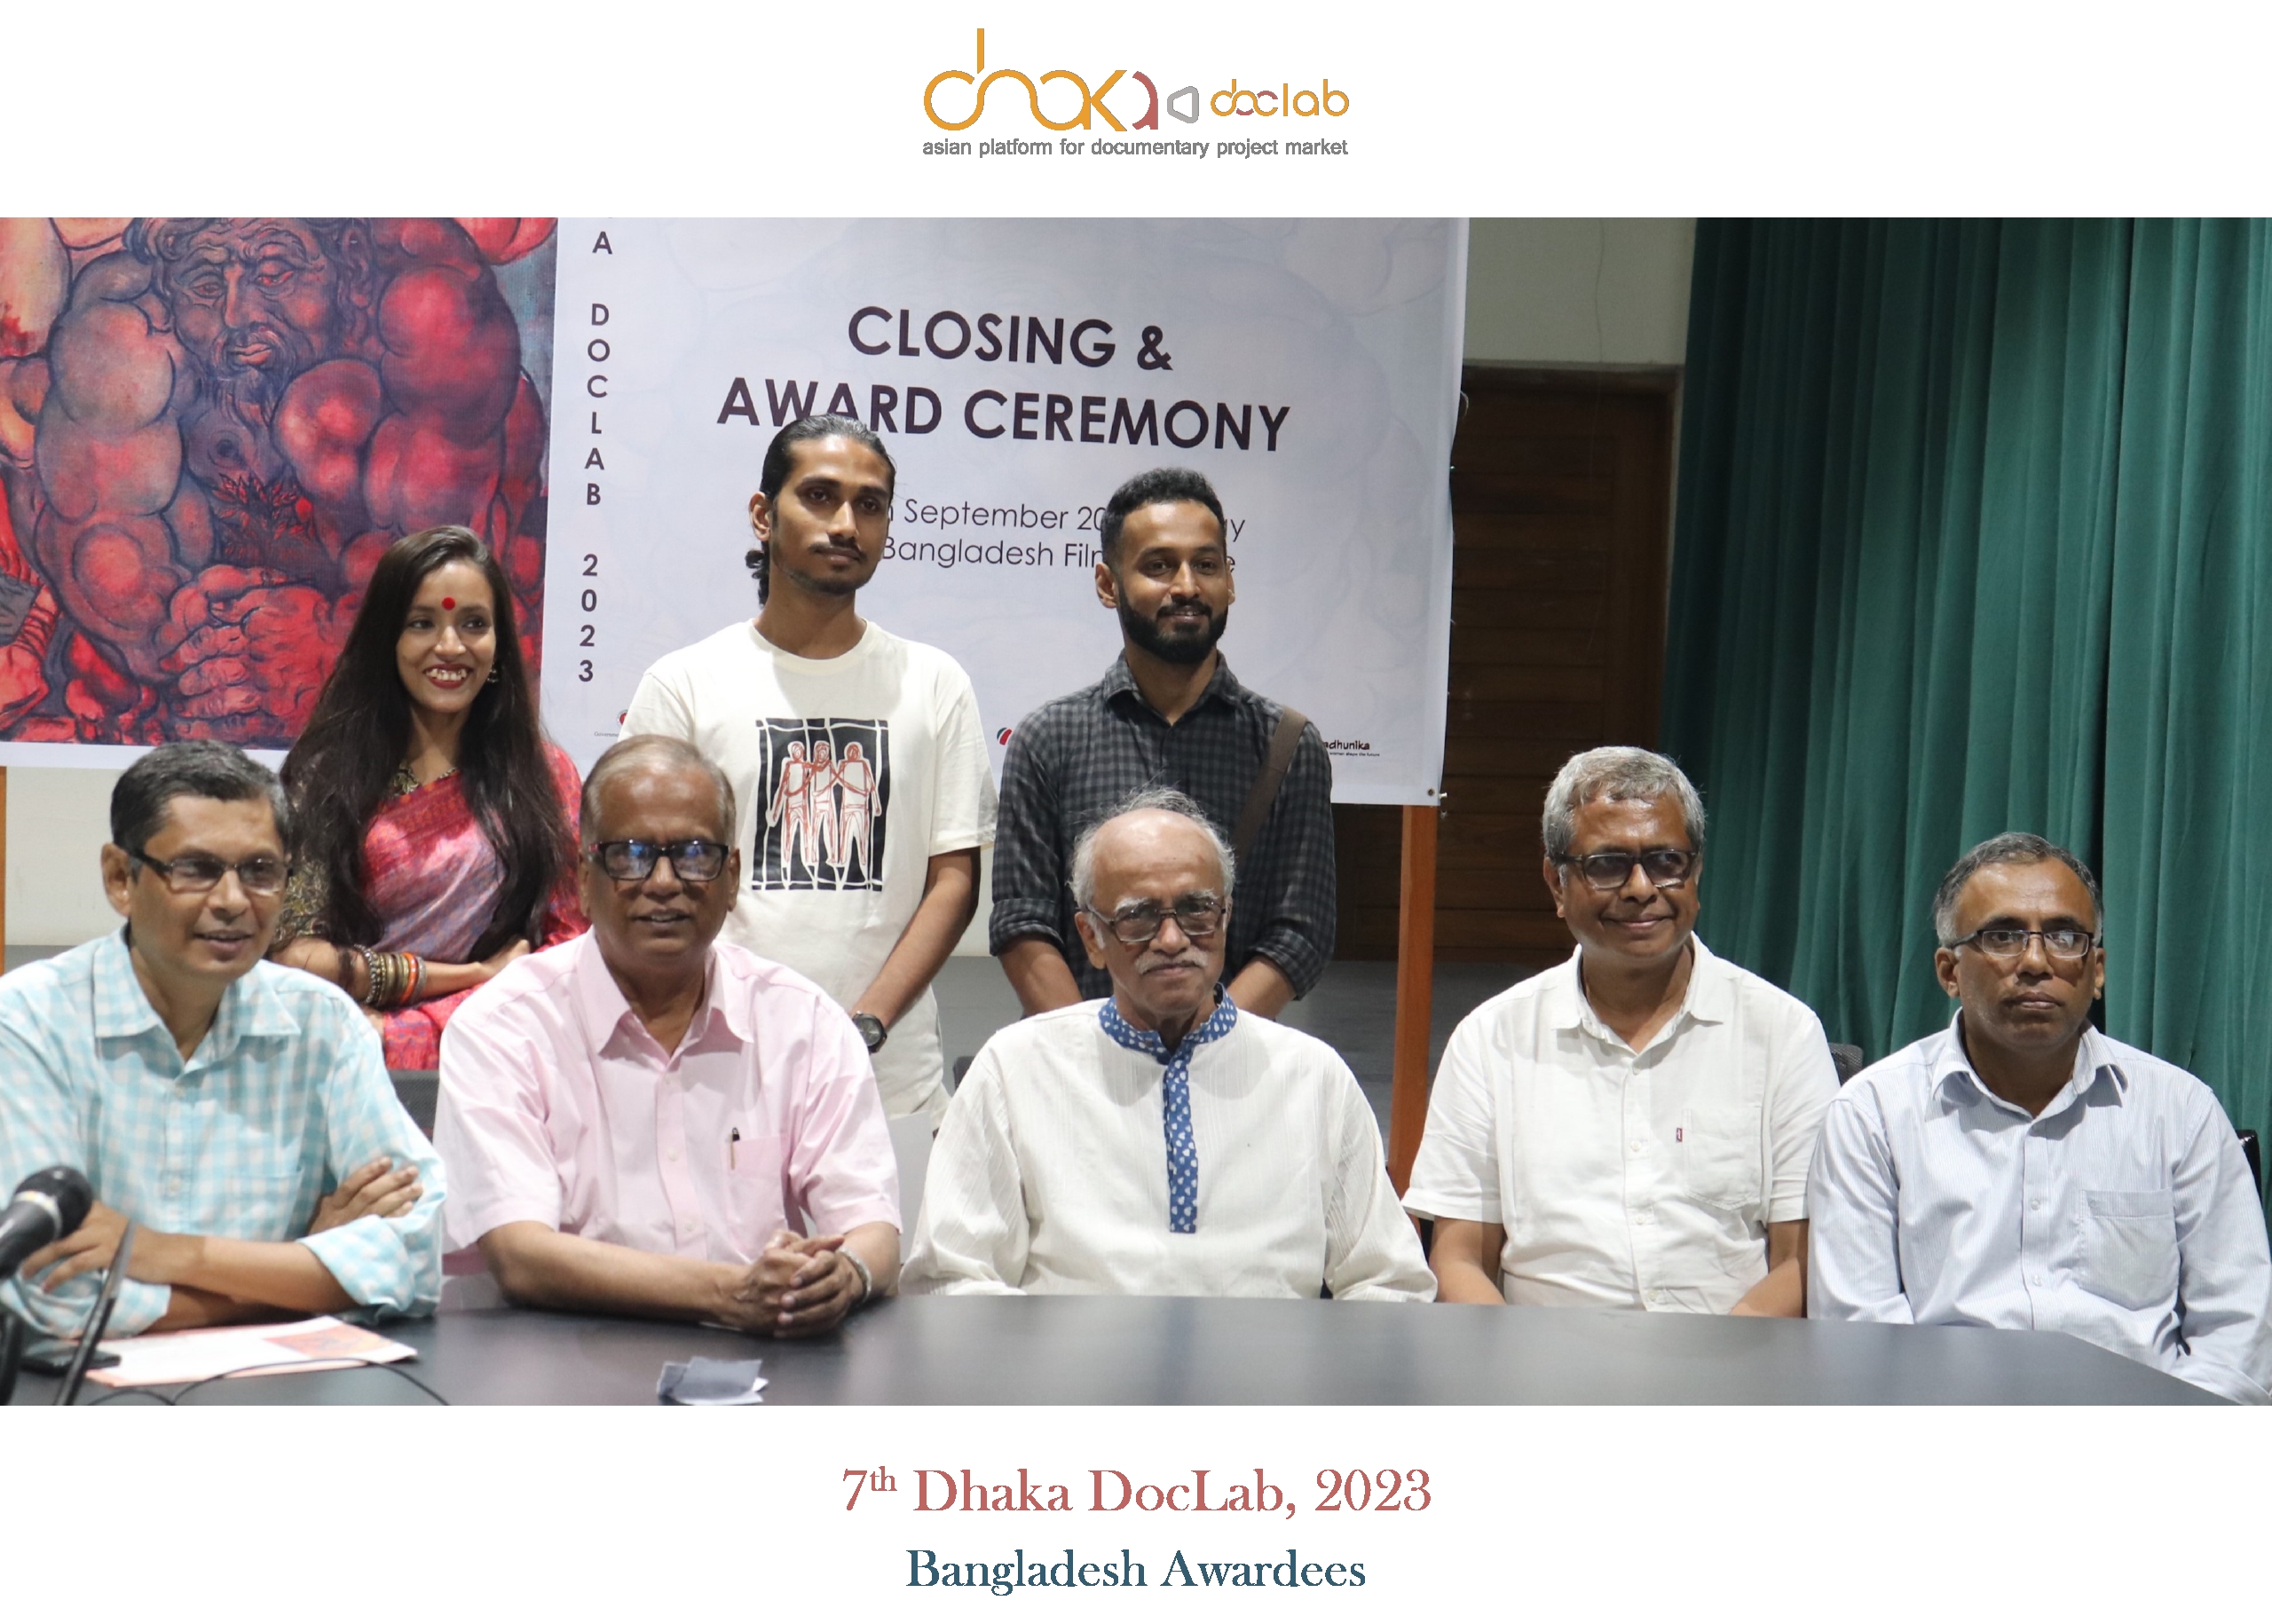 7th Dhaka Doclab closing and Award ceremony